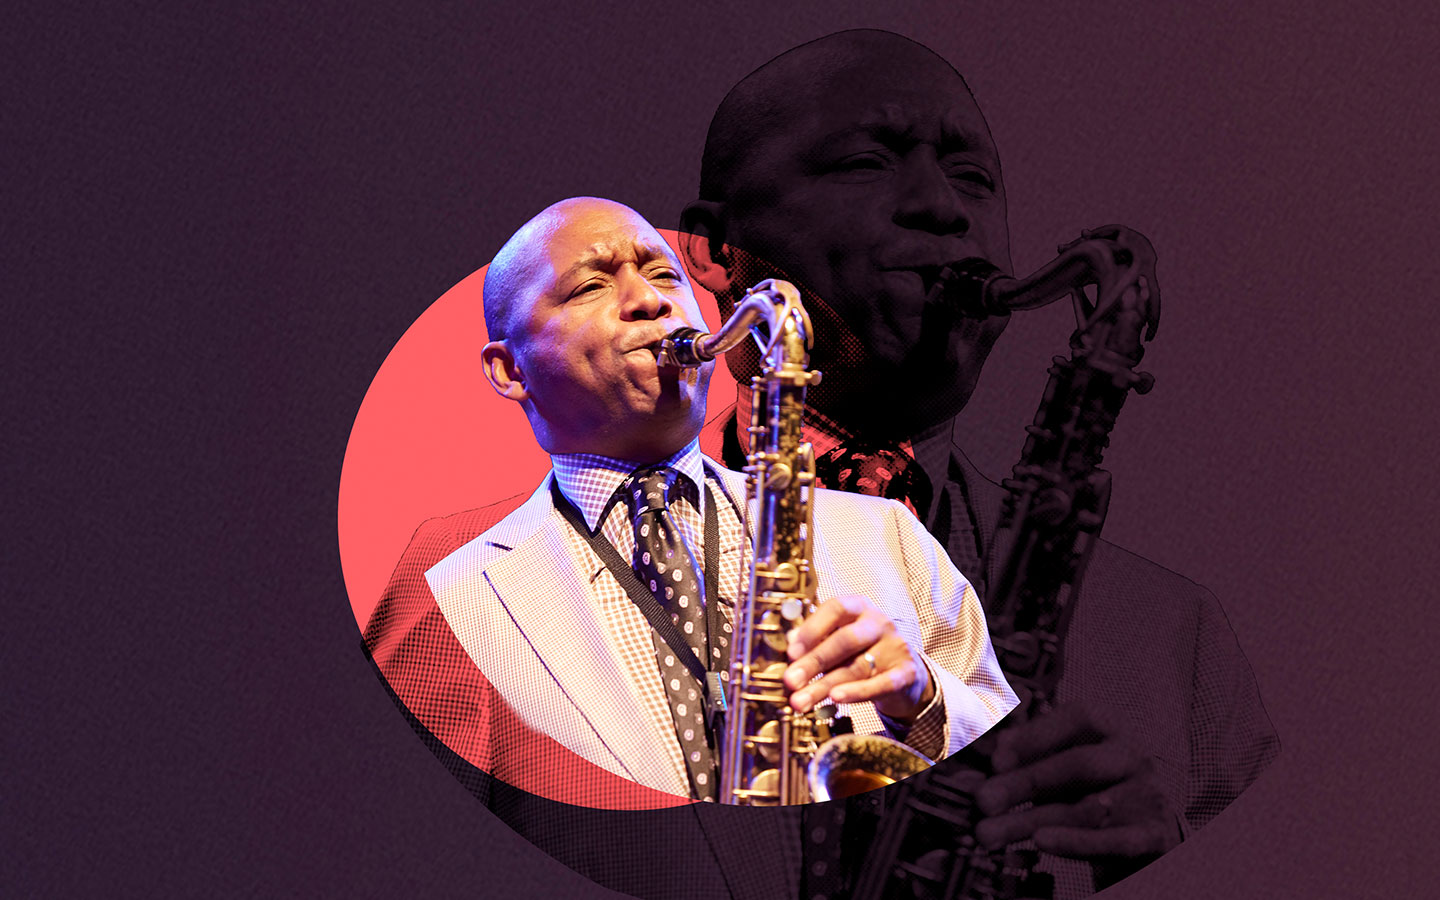 The tour image for the ACO's Branford Marsalis concerts